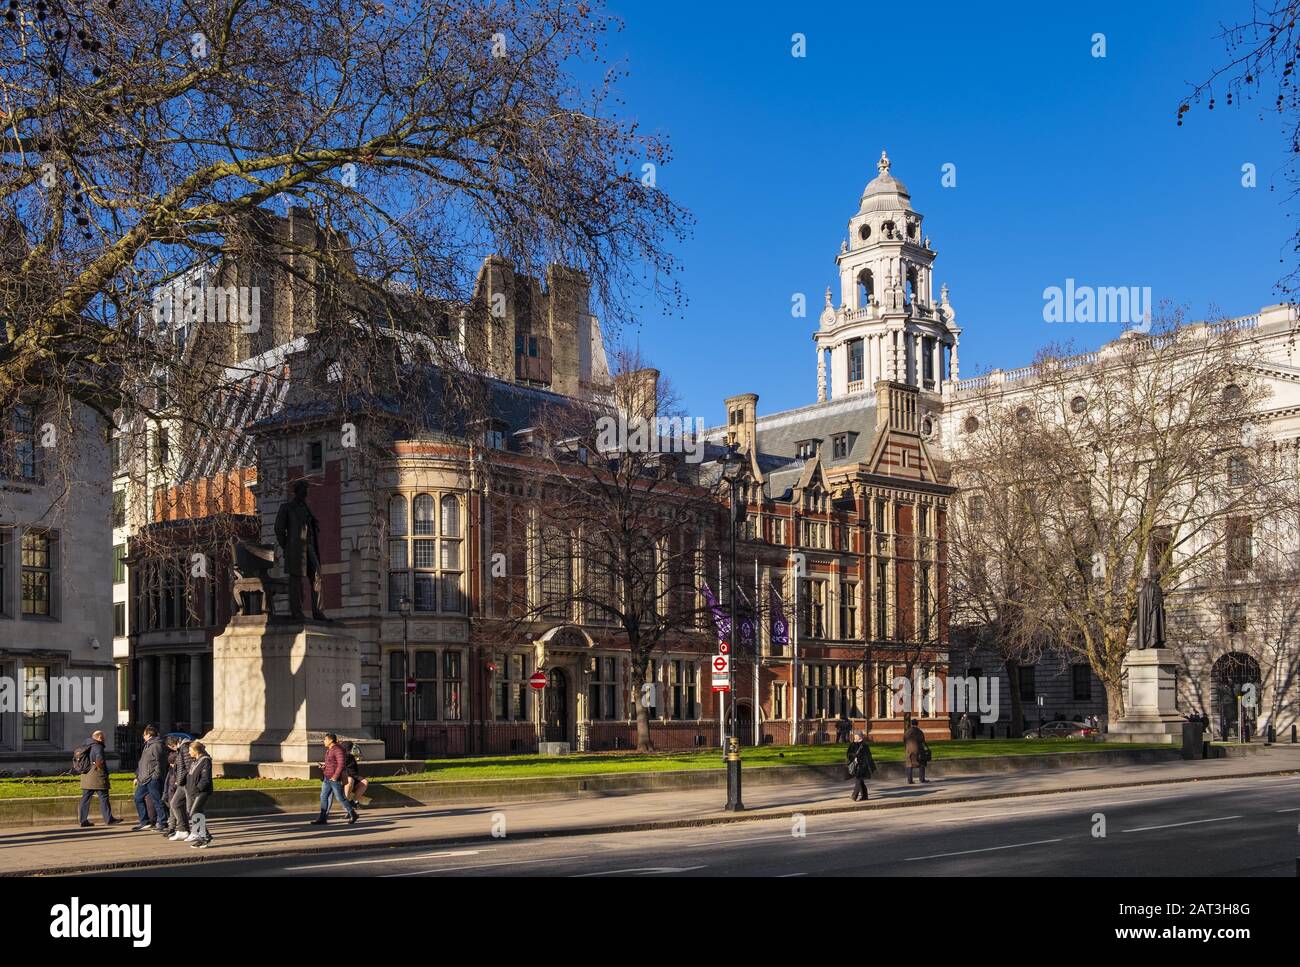 London, England / United Kingdom - 2019/01/28: Royal Institution of Chartered Surveyors - RICS - headquarters at the Parliament Square in the City of Westminster quarter of Central London Stock Photo